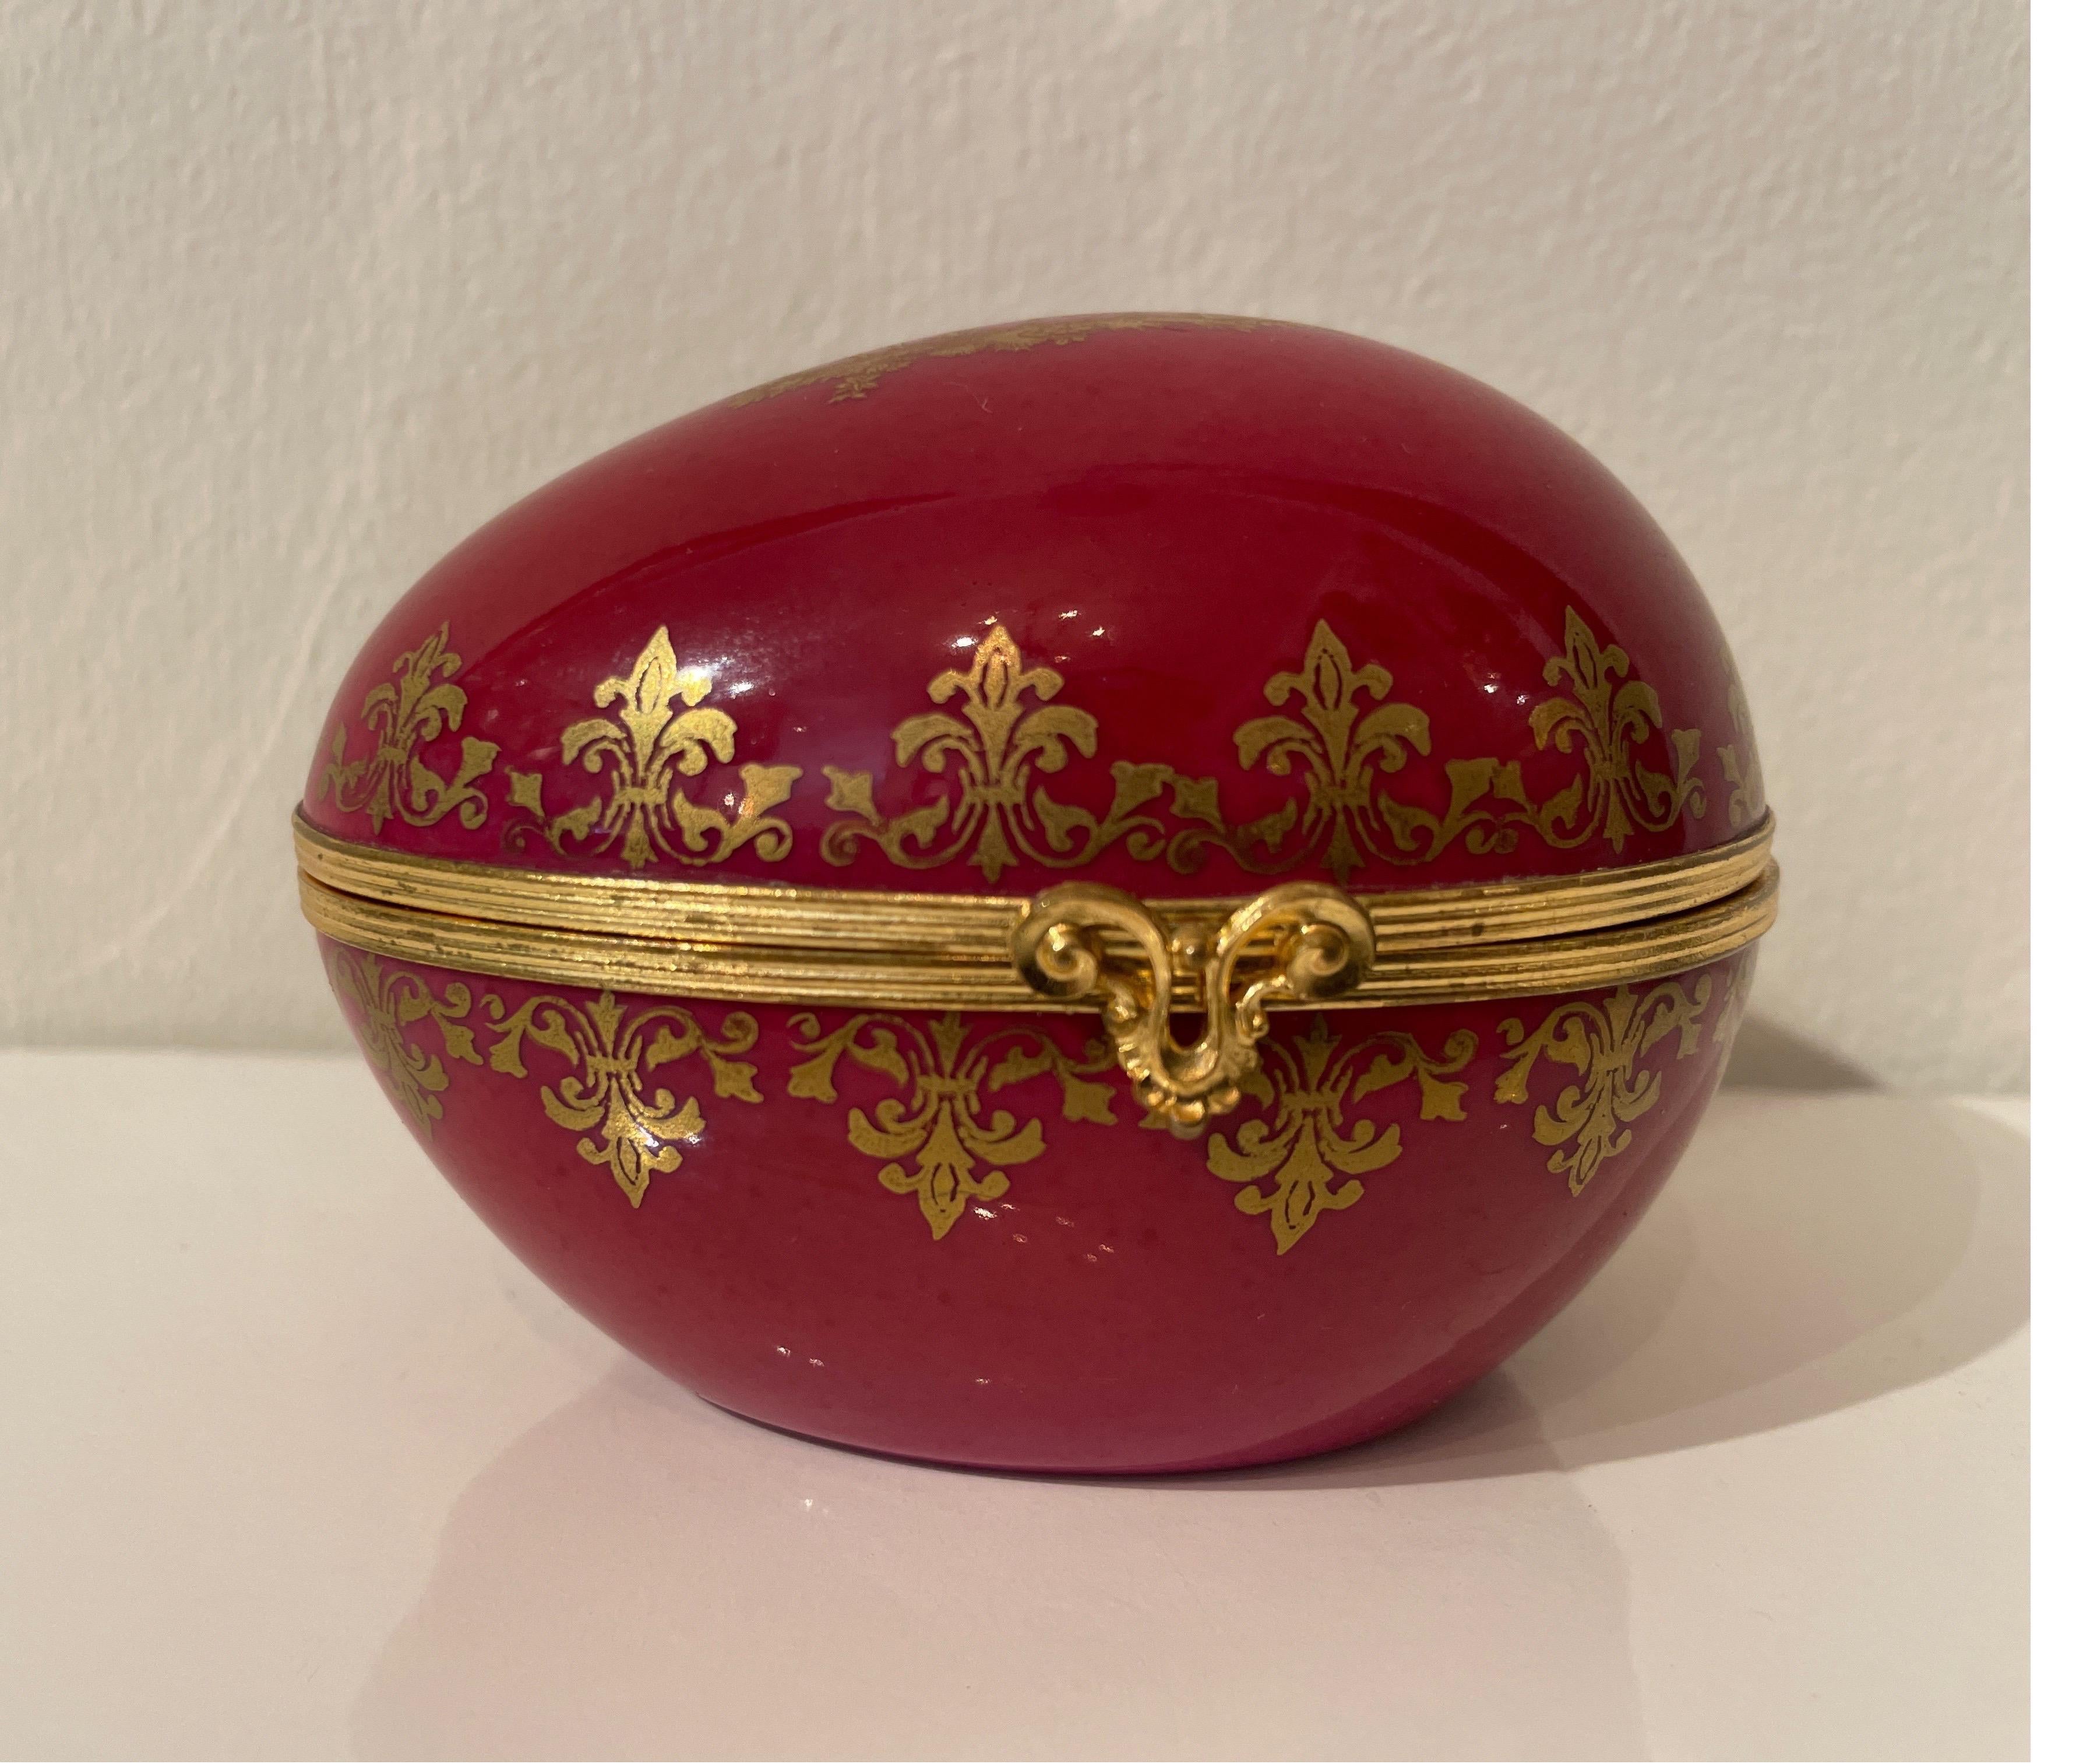 Large porcelain hand painted Limoge box in the shape of an egg. Trimmed in a gilded bronze. Egg is painted a rich burgundy color with gold accents.